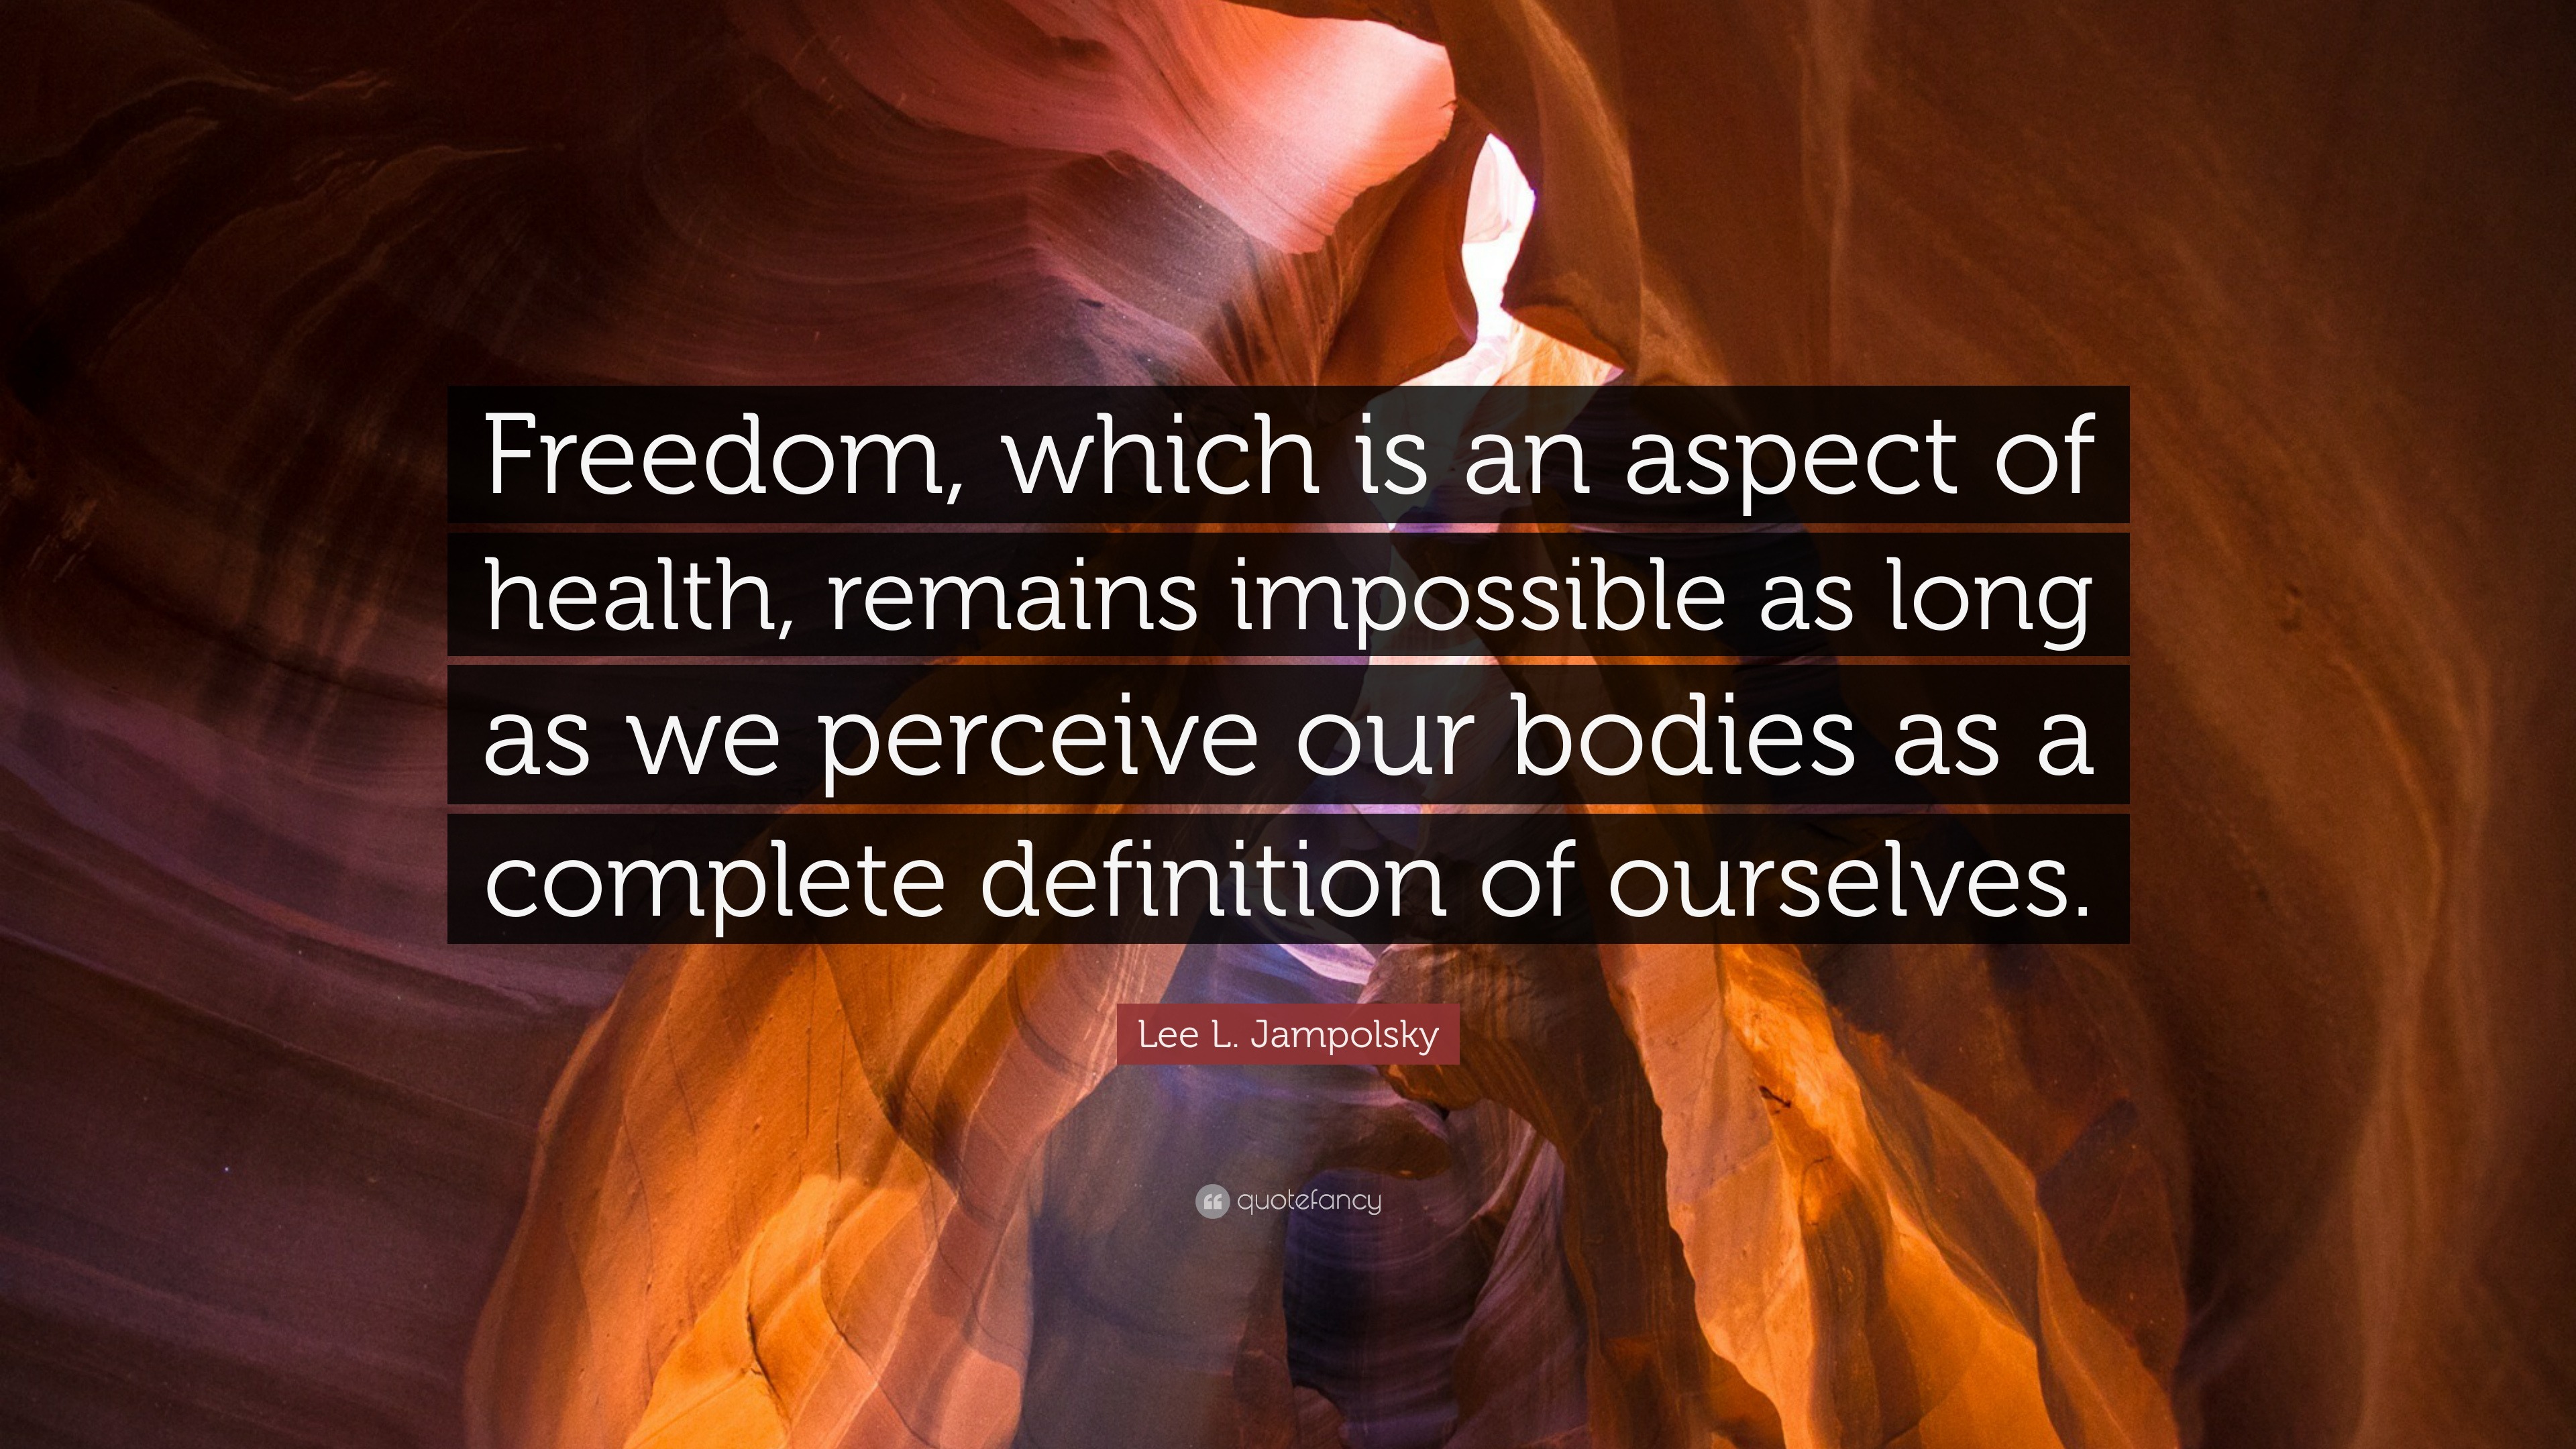 Lee L. Jampolsky Quote: “Freedom, which is an aspect of health, remains  impossible as long as we perceive our bodies as a complete definition of  ...”